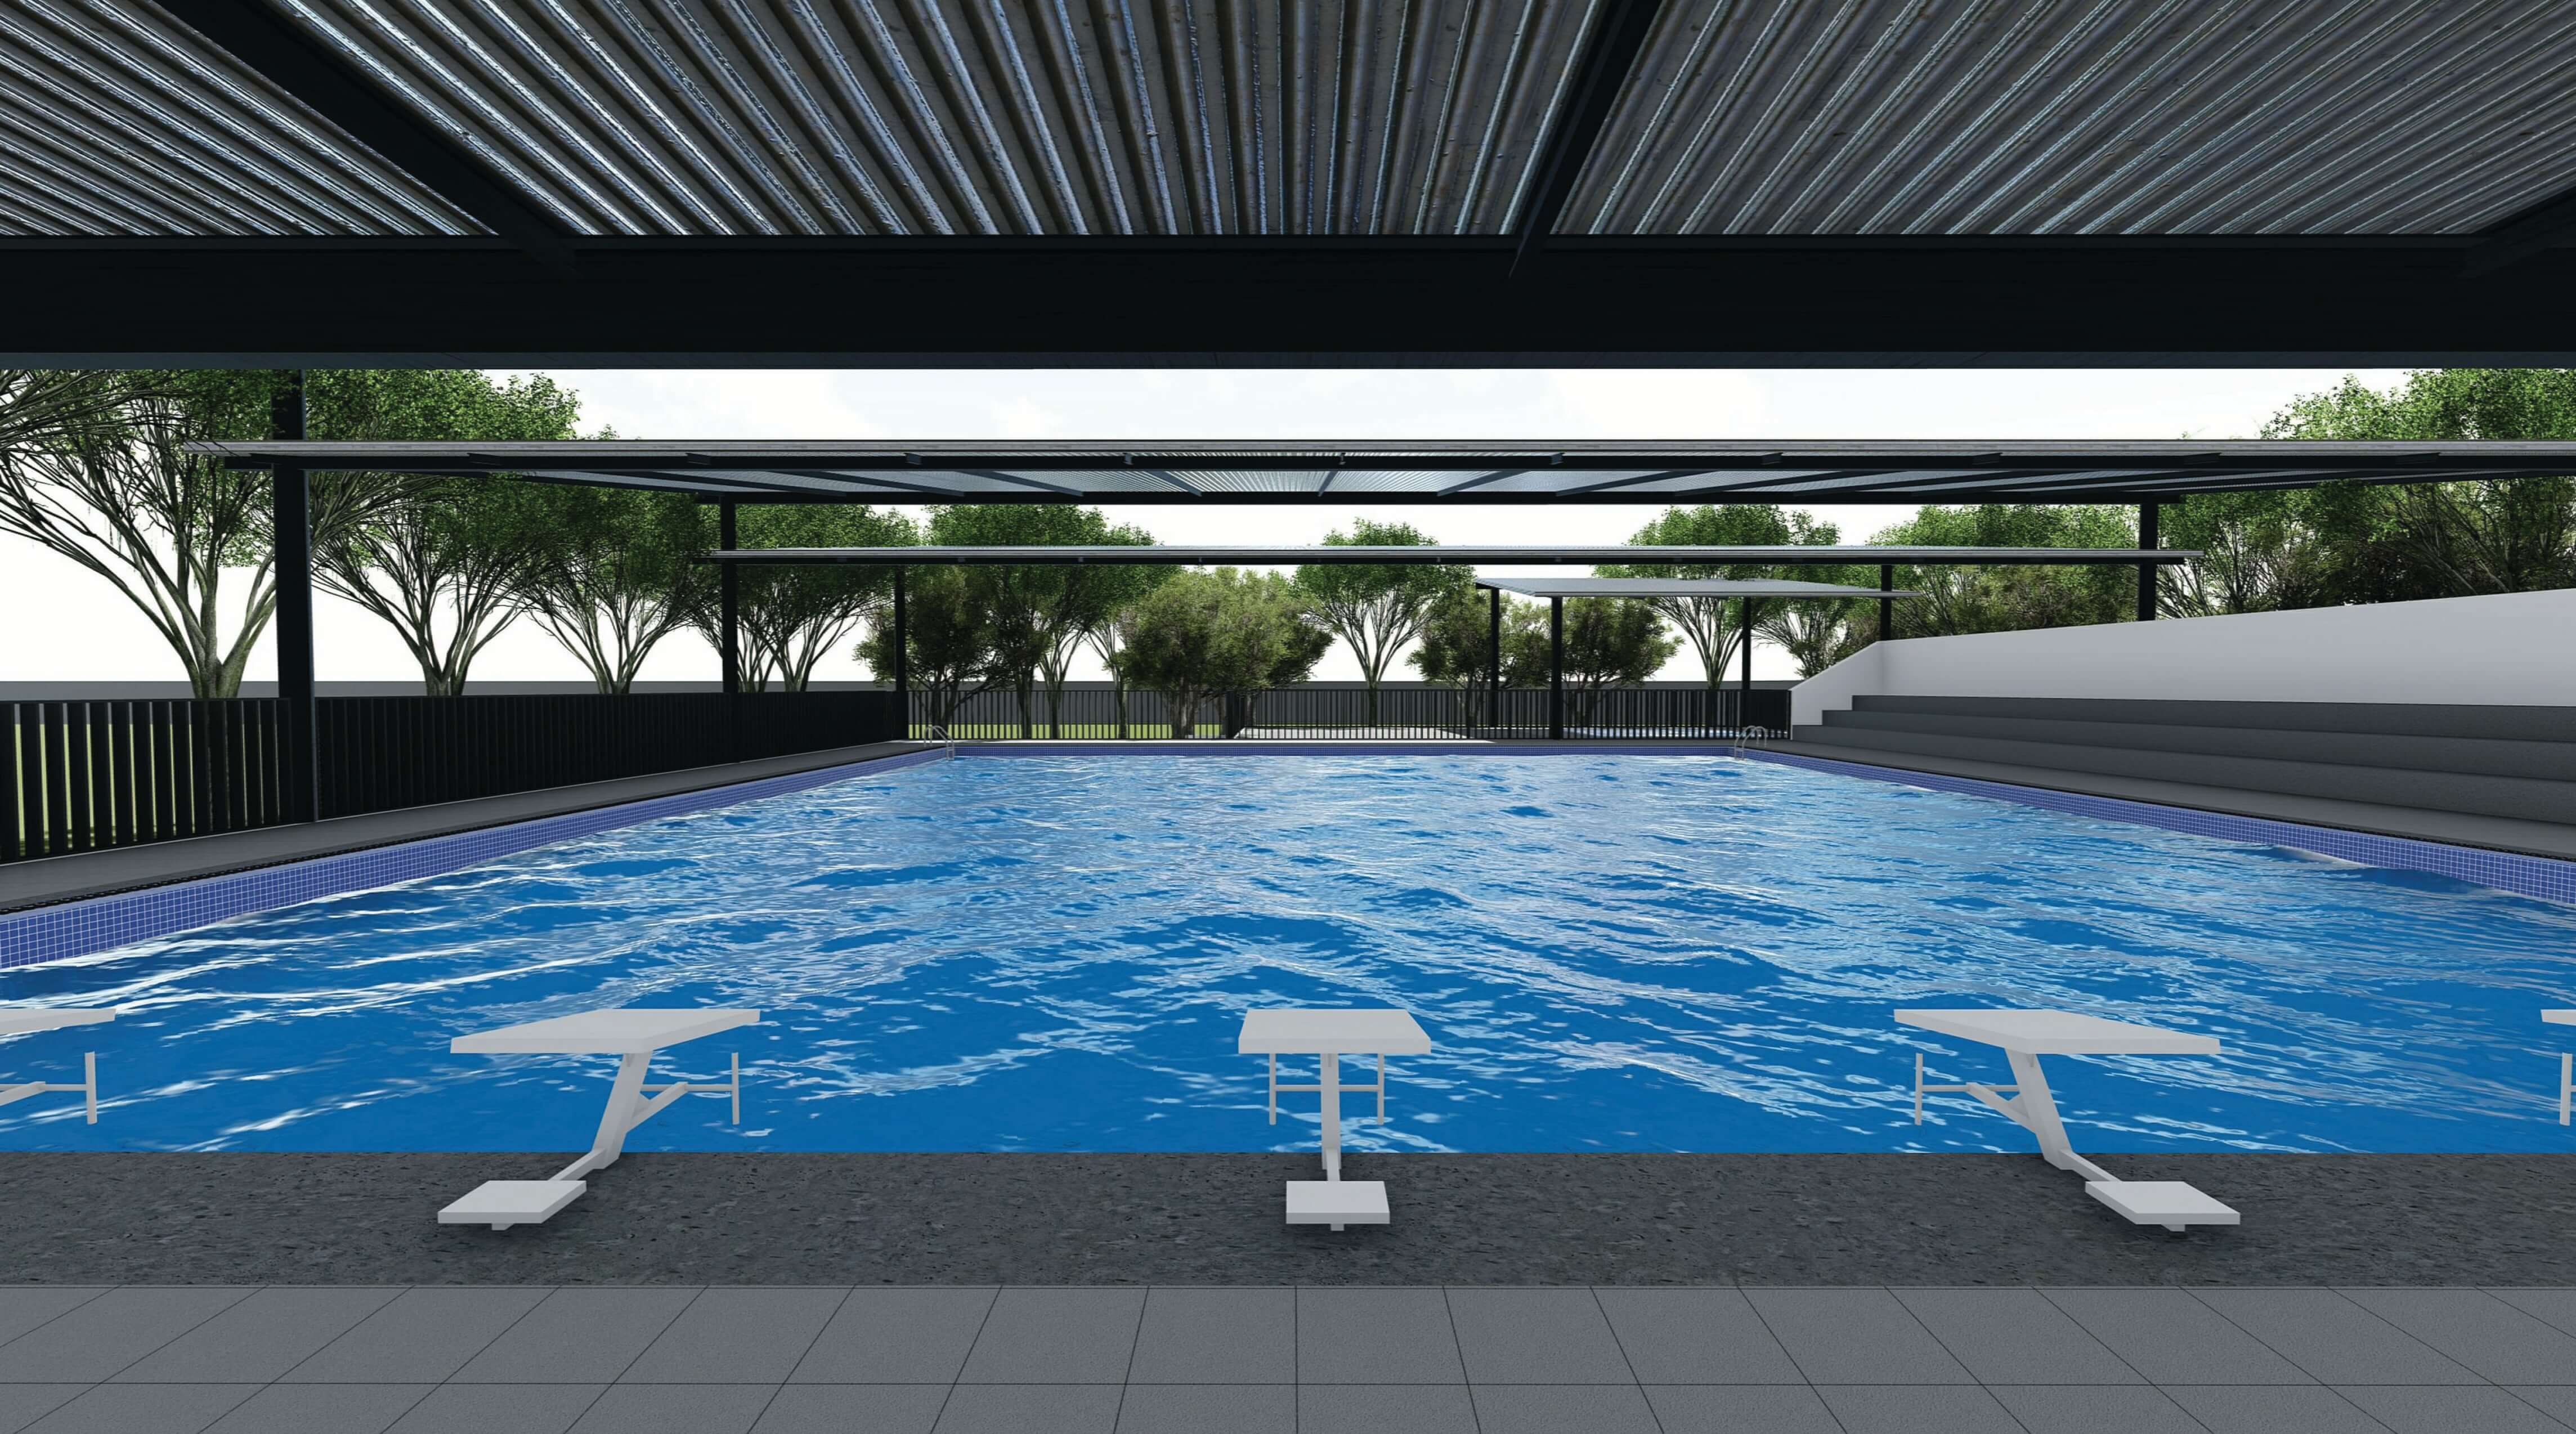 New Northbridge Aquatics Centre to provide students with world-class learning and training facility-new-northbridge-aquatics-centre-to-provide-students-with-world-class-learning-and-training-facility-NorthBridge Swimming Pool Concept OPTION 3B_E 1 116